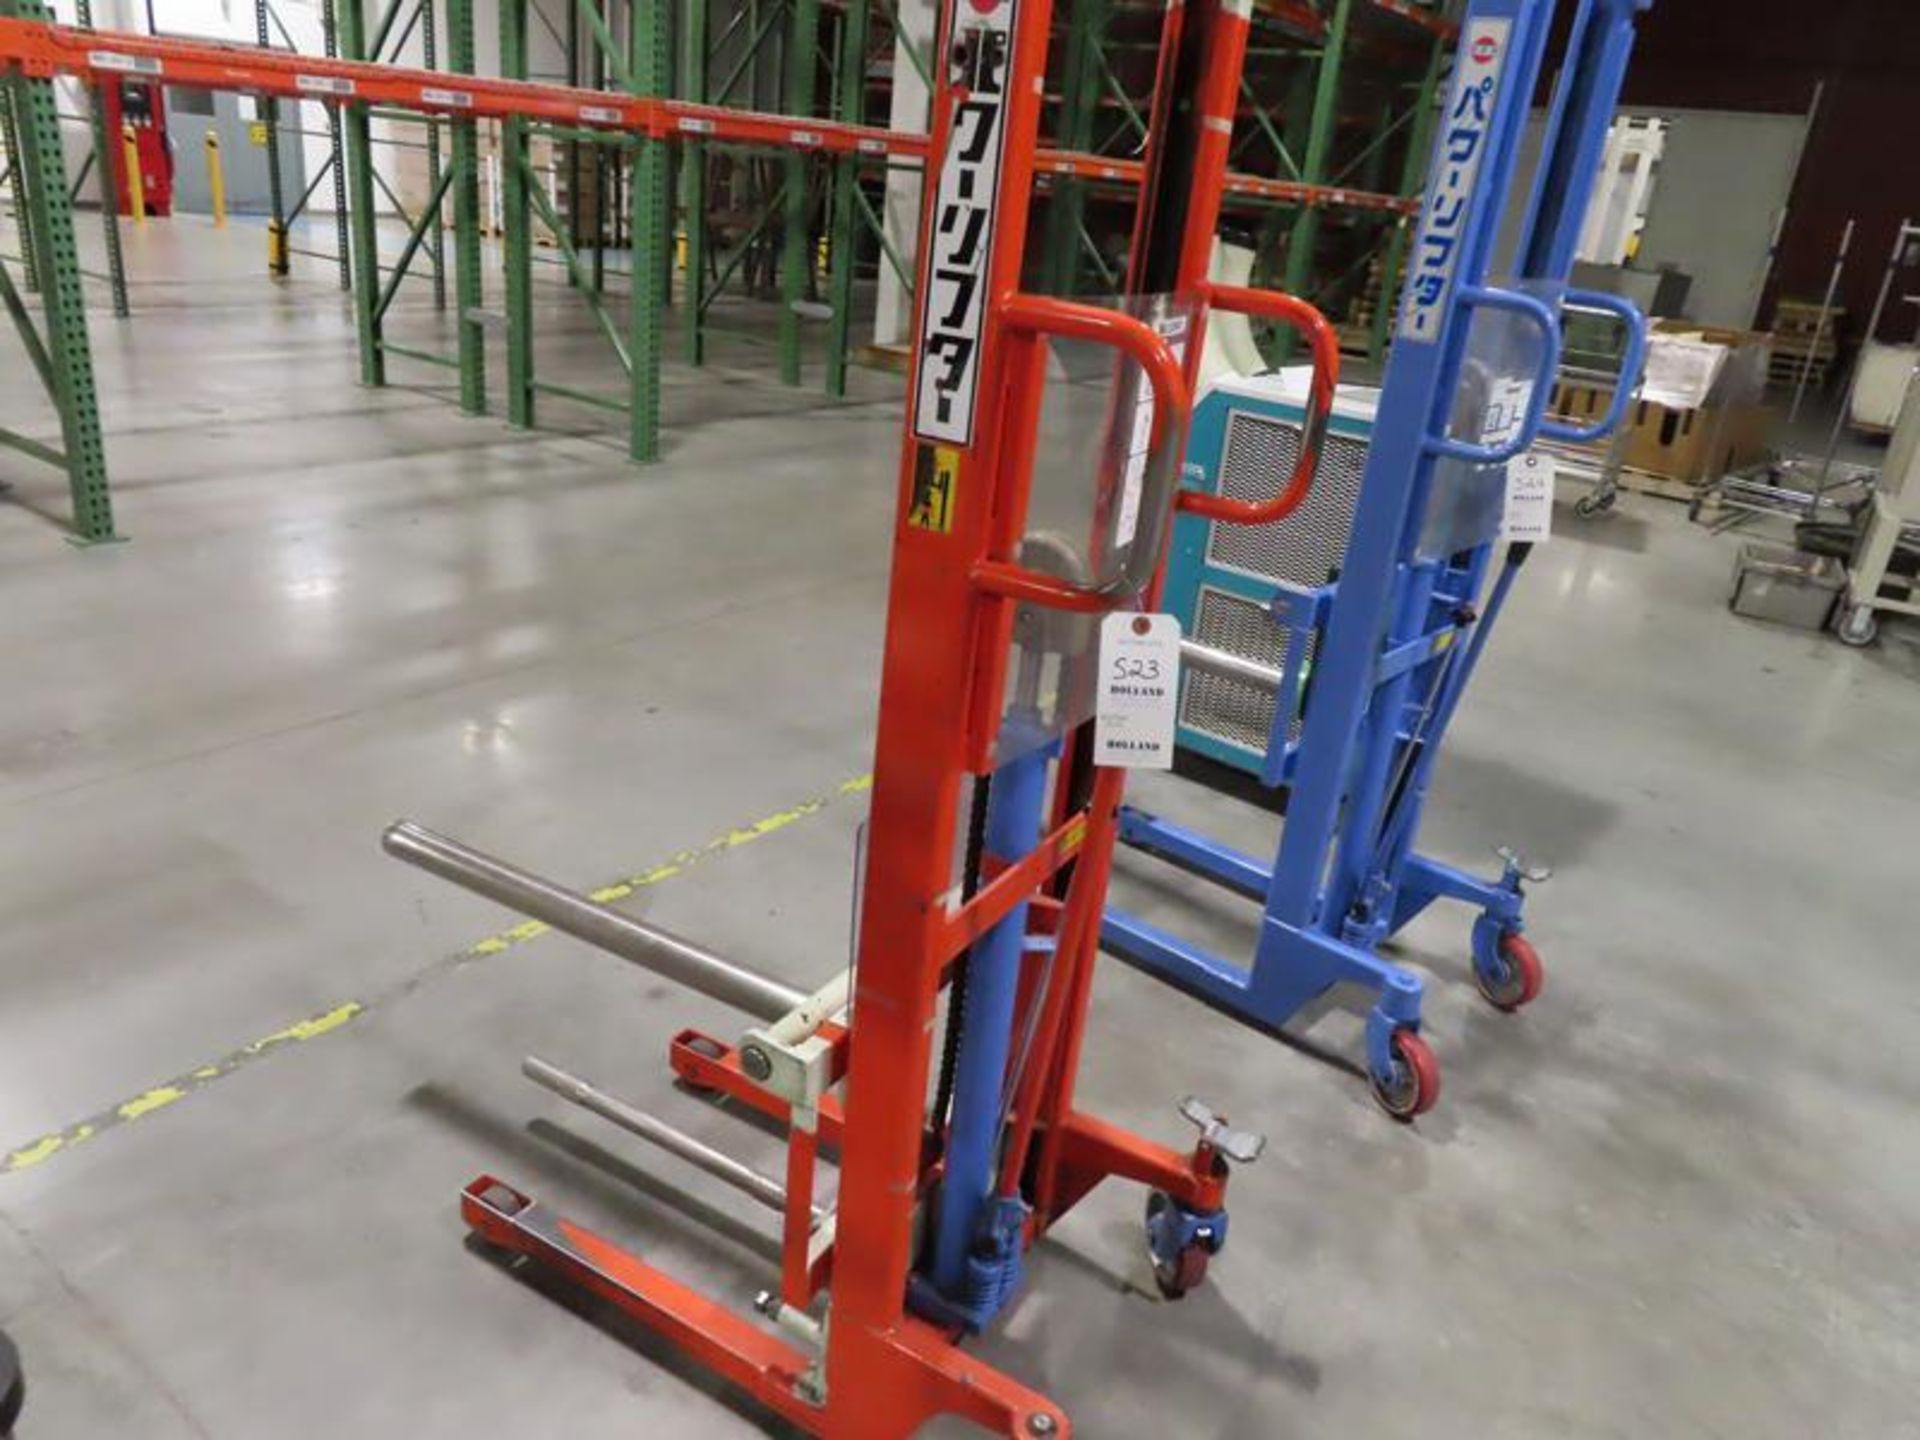 O.P.K Roll Handling Lifter (approx 770 pound capacity)